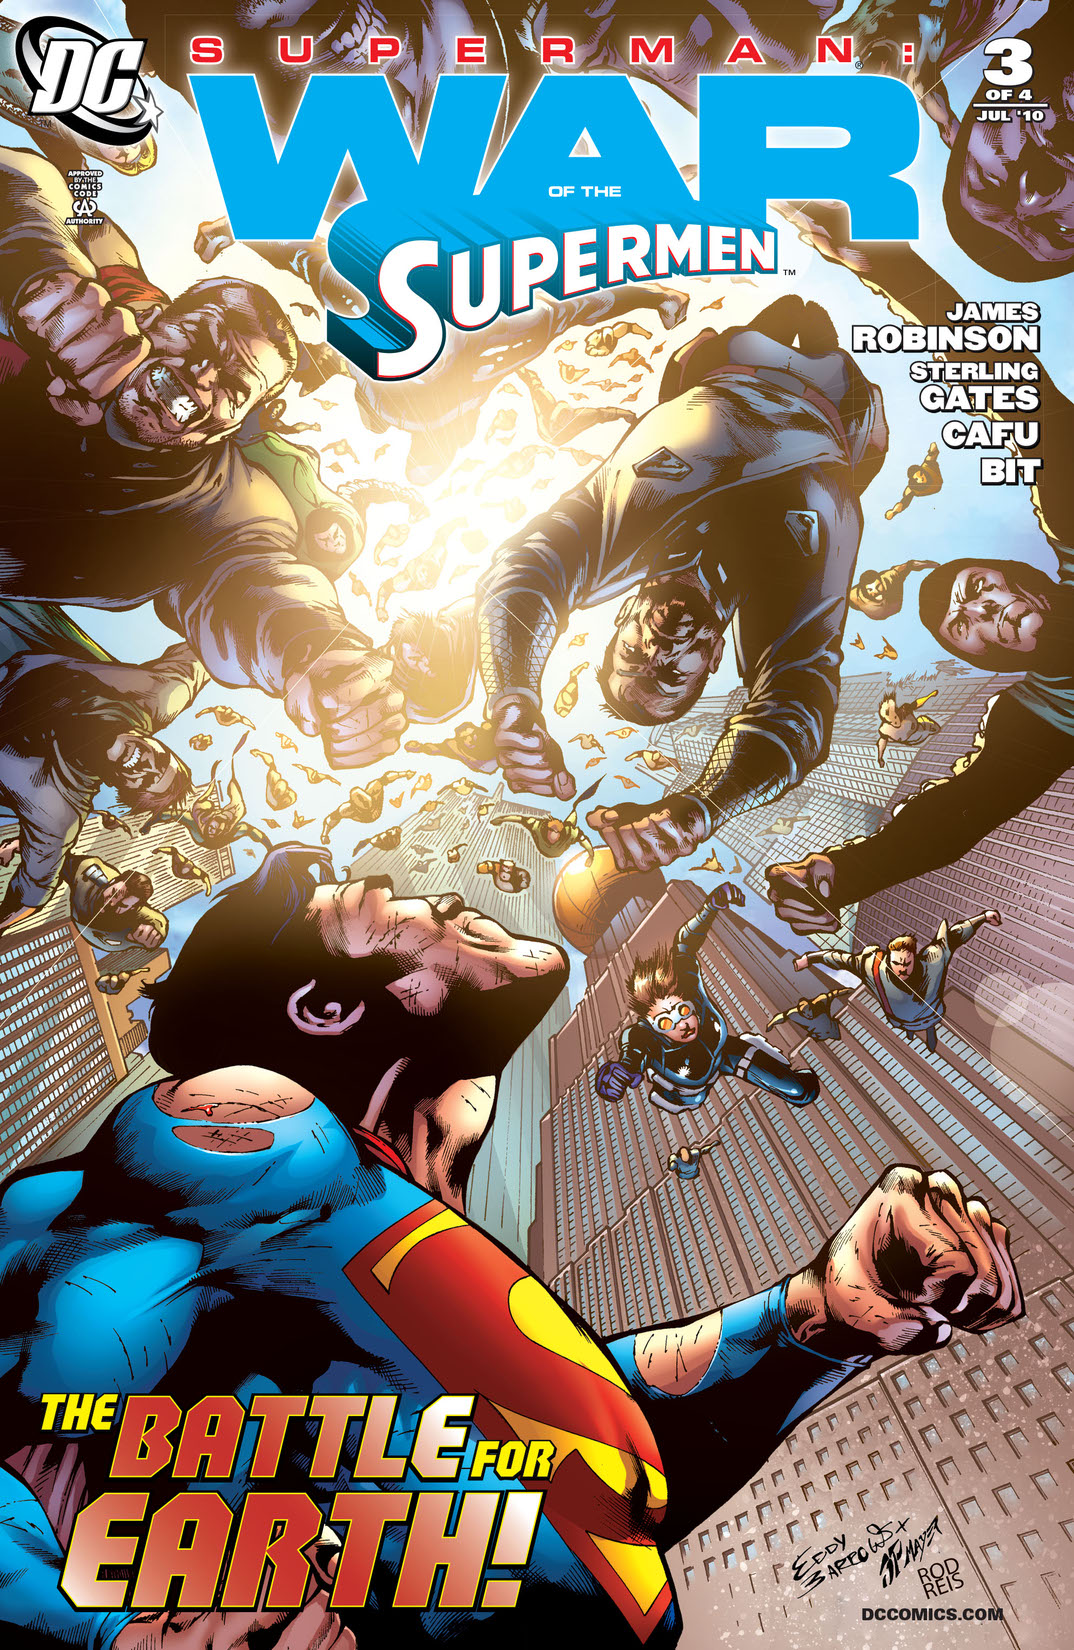 Superman: War of the Supermen #3 preview images